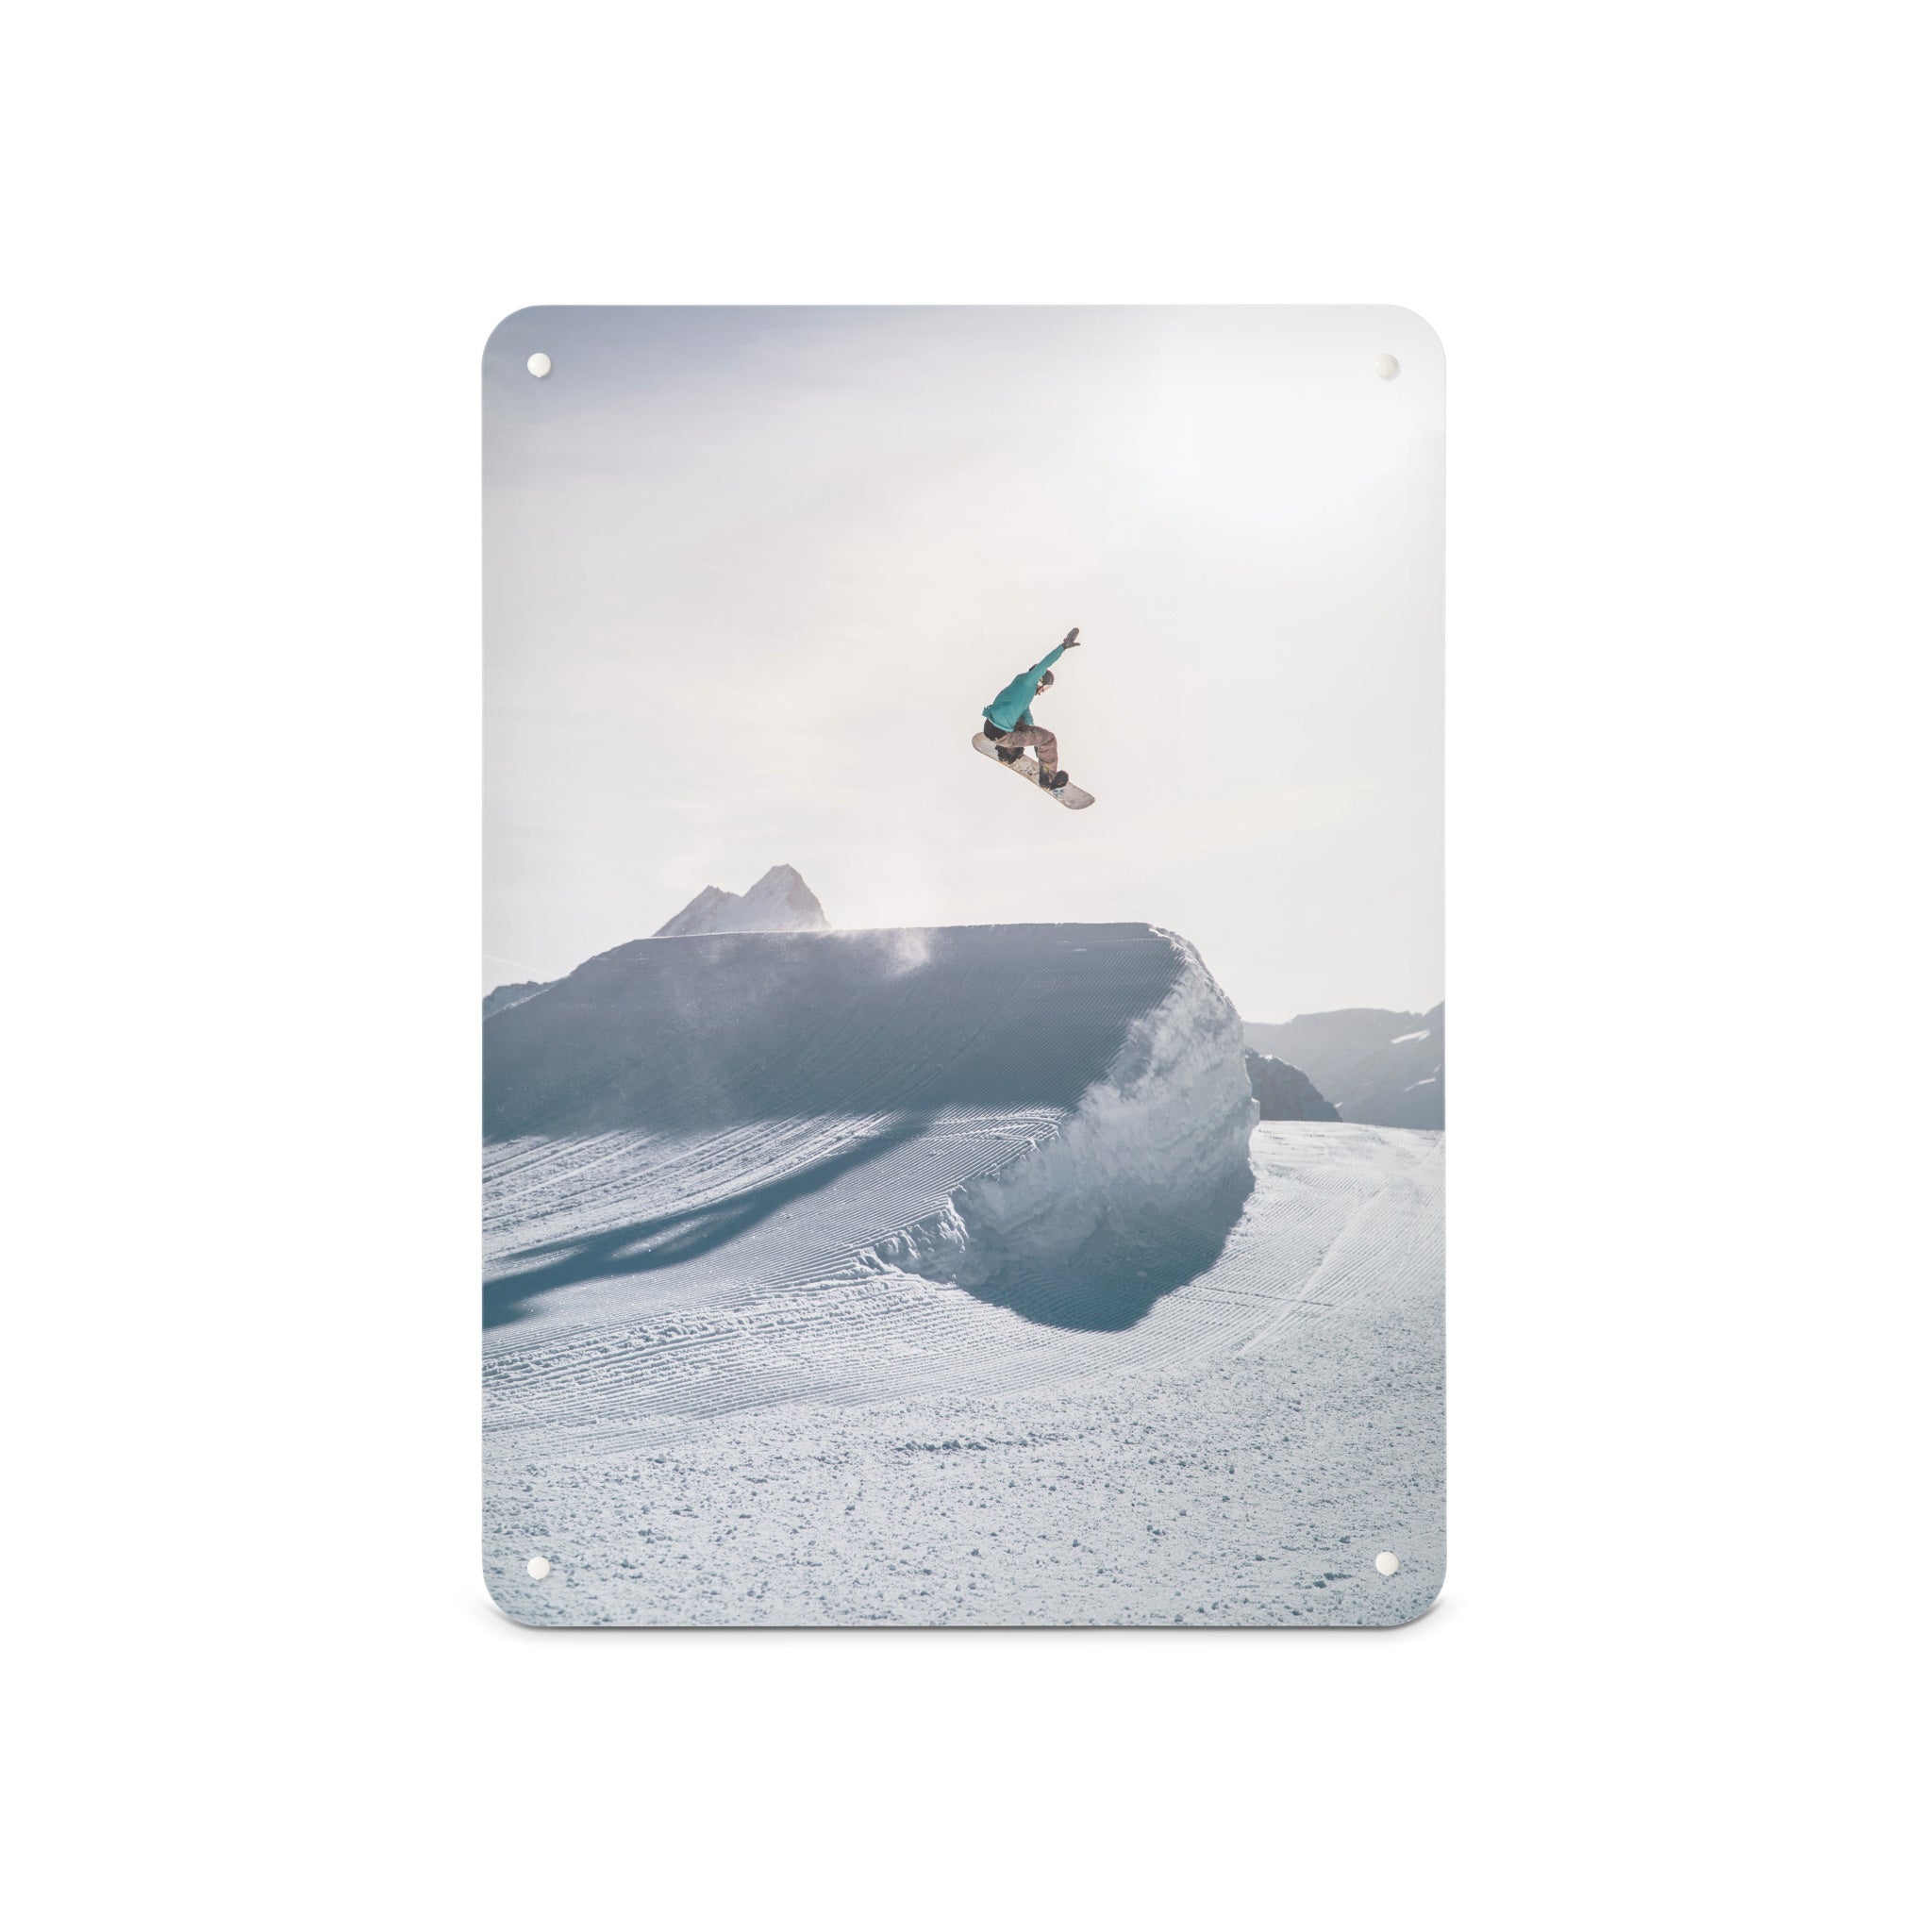 A medium magnetic notice board by Beyond the Fridge with a photograph of a snowboarder jumping on a snowboard in a bright snowy landscape